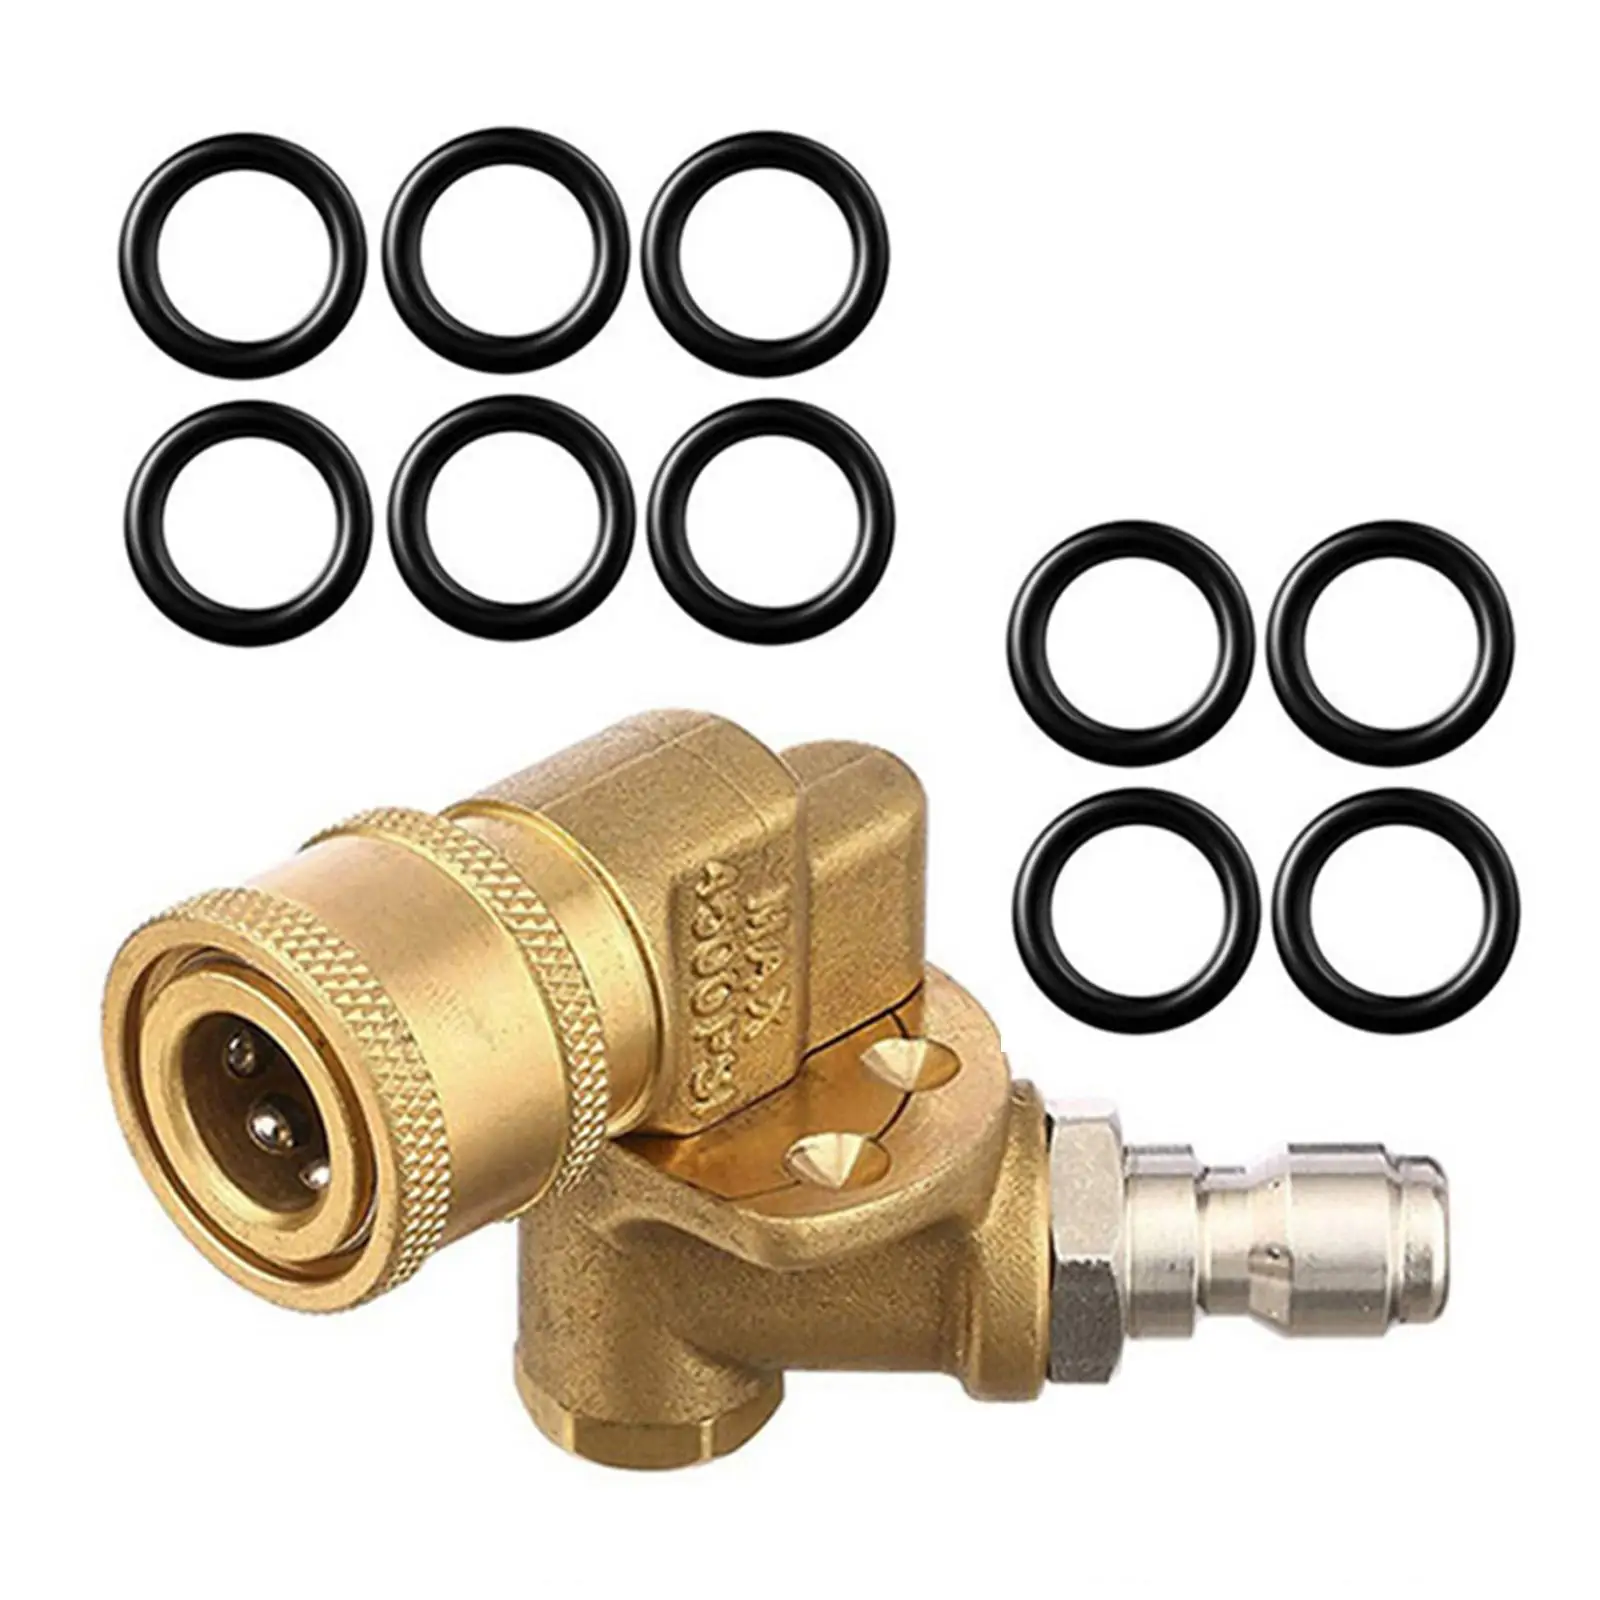 Quick Installation 7 Angle Couple for Pressure Washer Nozzle Tips Rotation Cleaner Attachment 1/4 inch Sprayer Nozzle